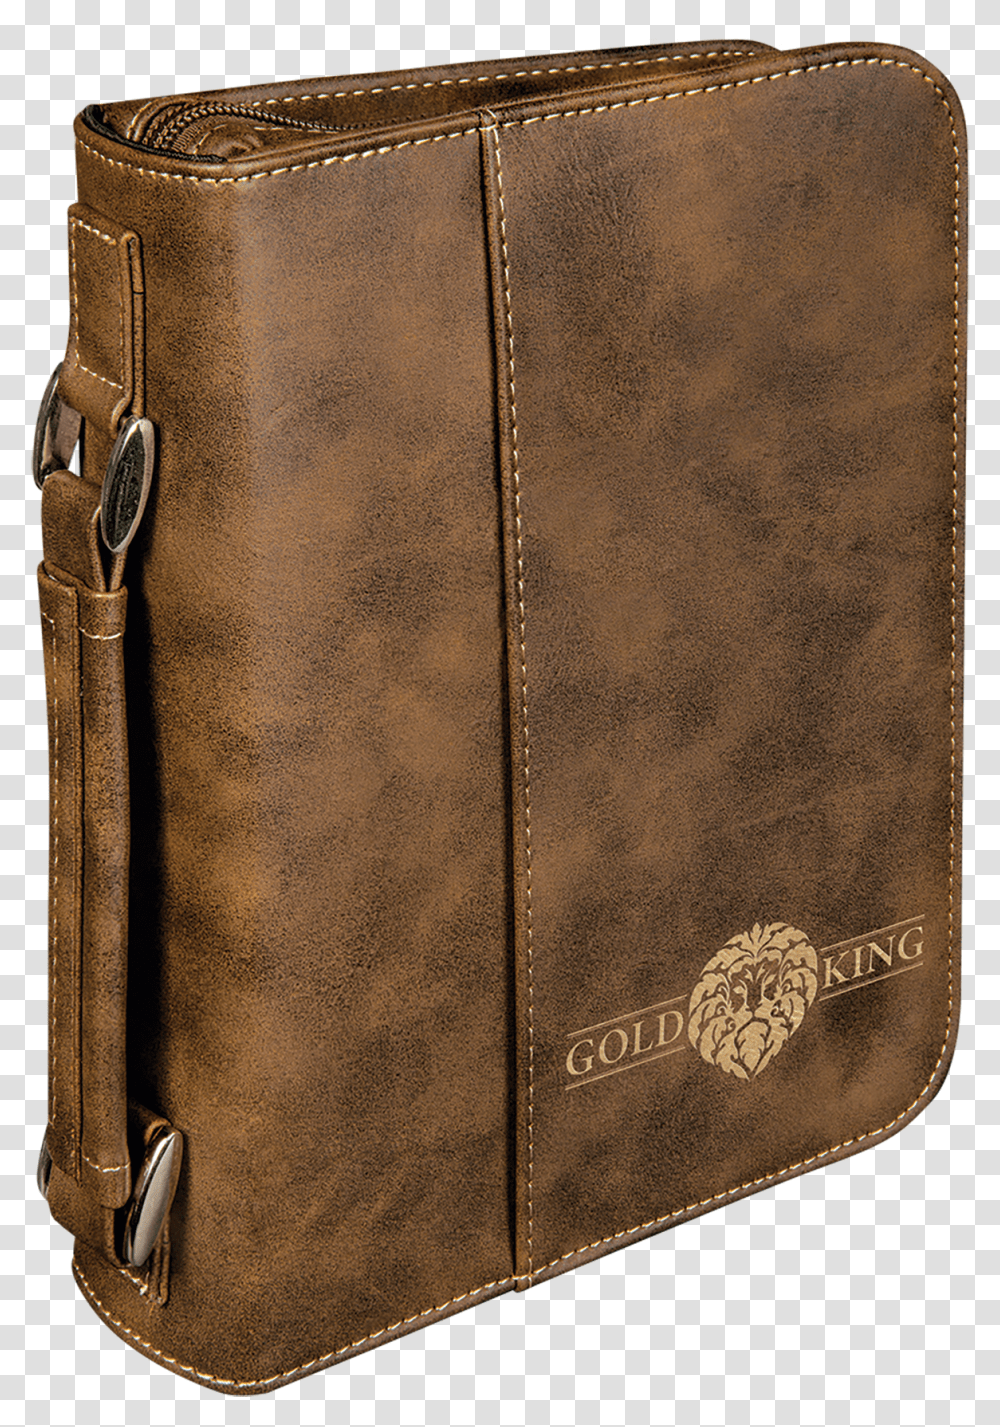 Rustic Amp Gold Leatherette Bookbible Cover With Handle, Wallet, Accessories, Accessory, Briefcase Transparent Png